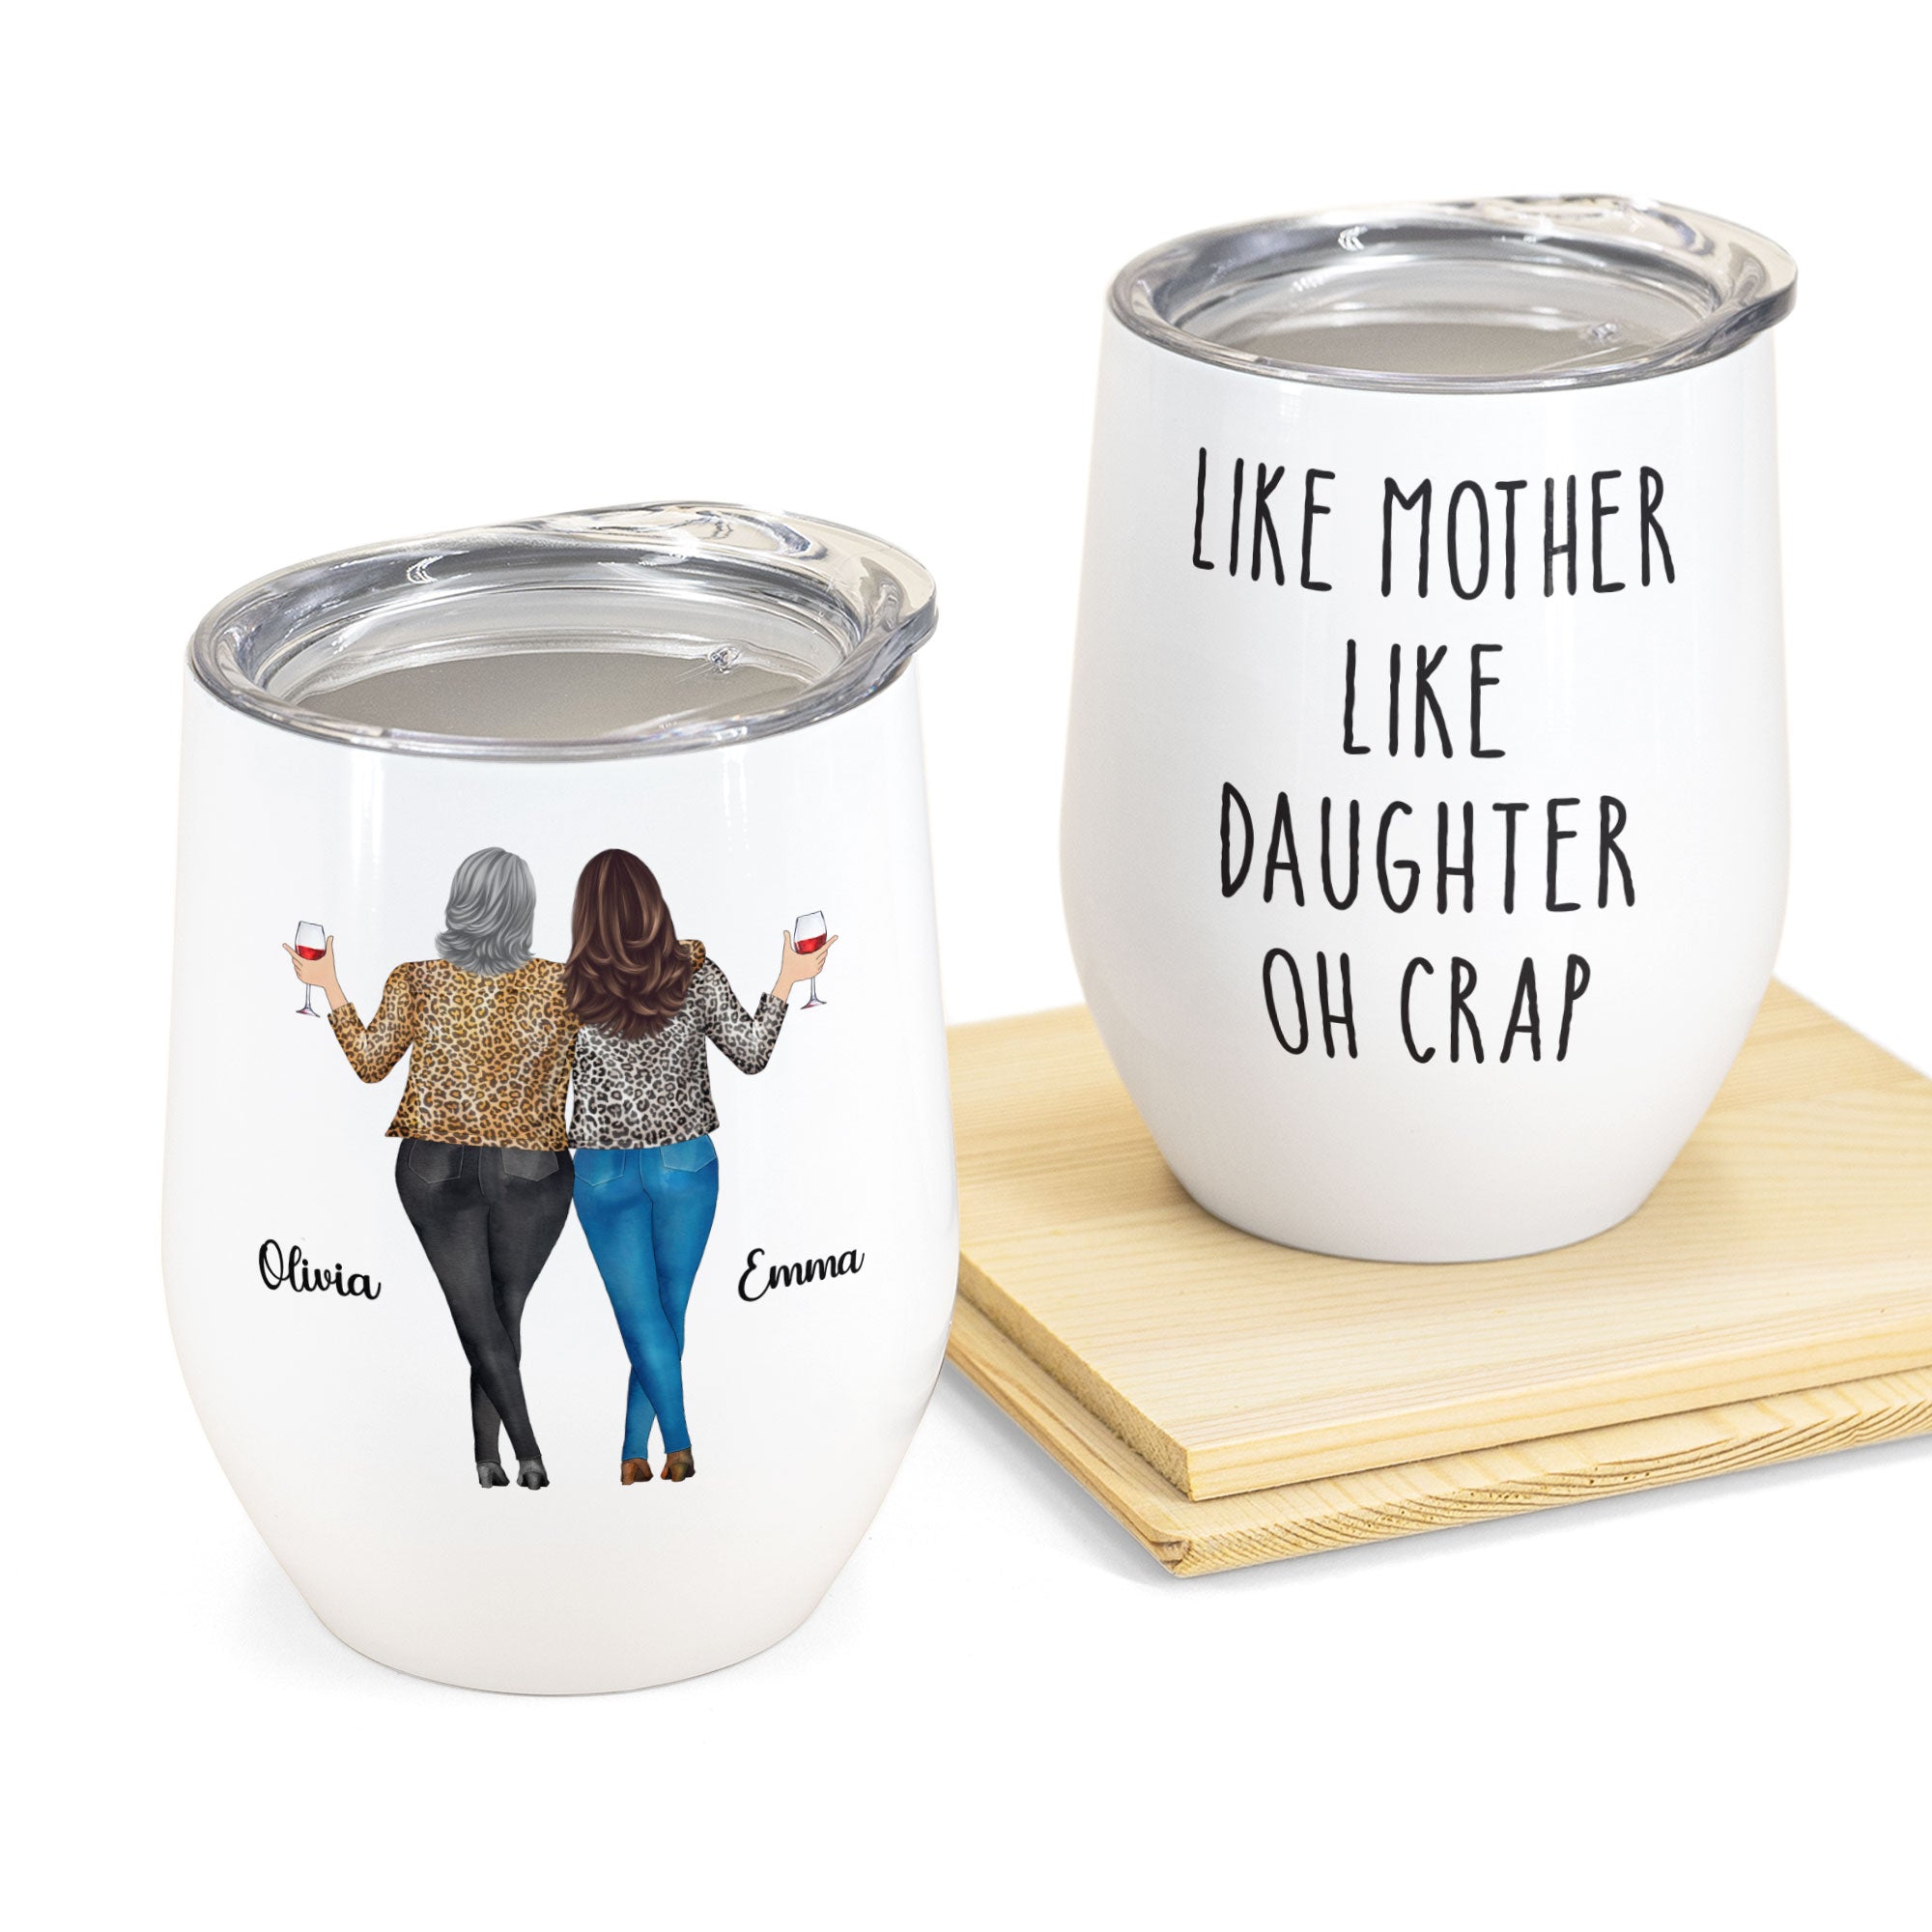 Like Mother Like Daughter - Personalized Wine Tumbler - Mother's Day Gift For Mother, Mom, Daughter - Drunk Woman  LKE MOTHER LIKE DAUGHTER 